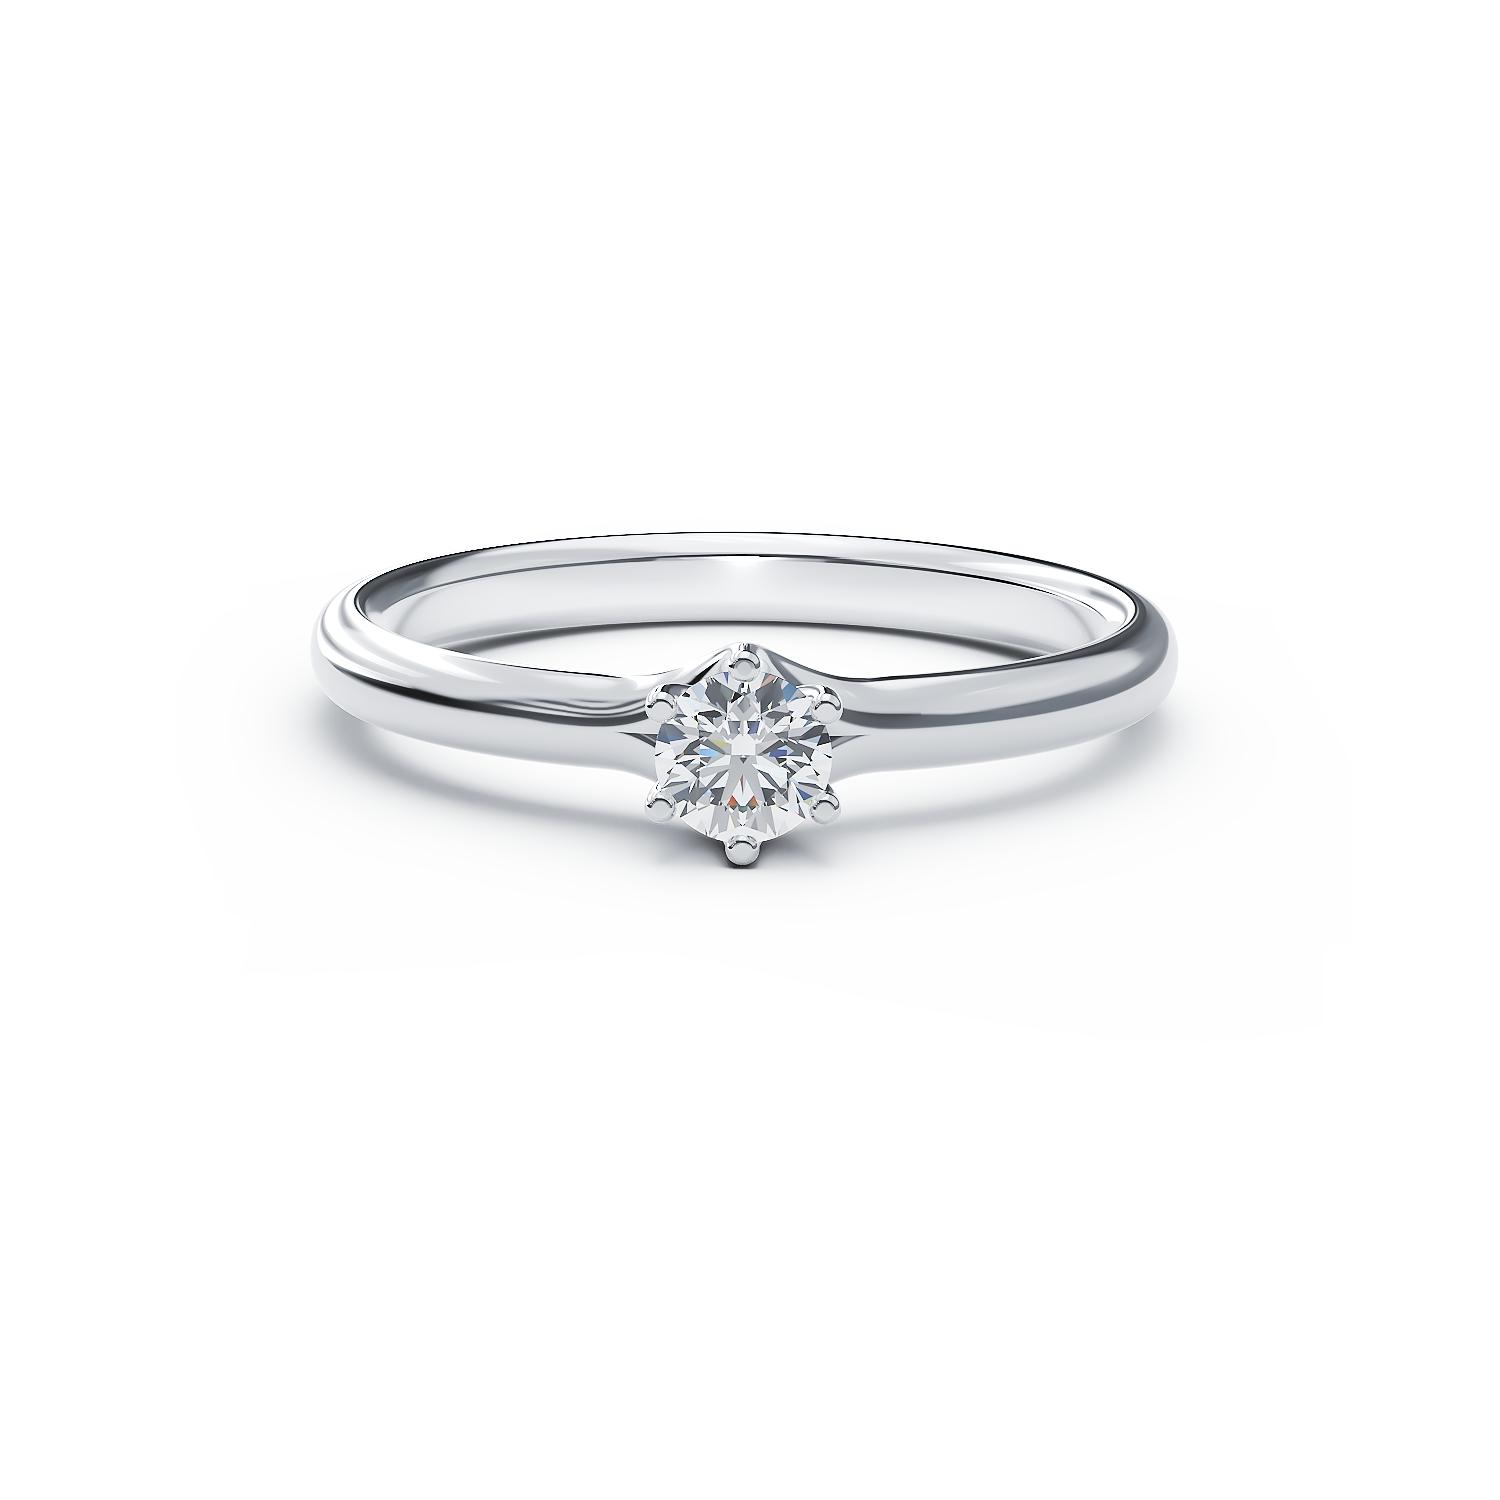 Platinum engagement ring with a 0.193ct solitaire diamond